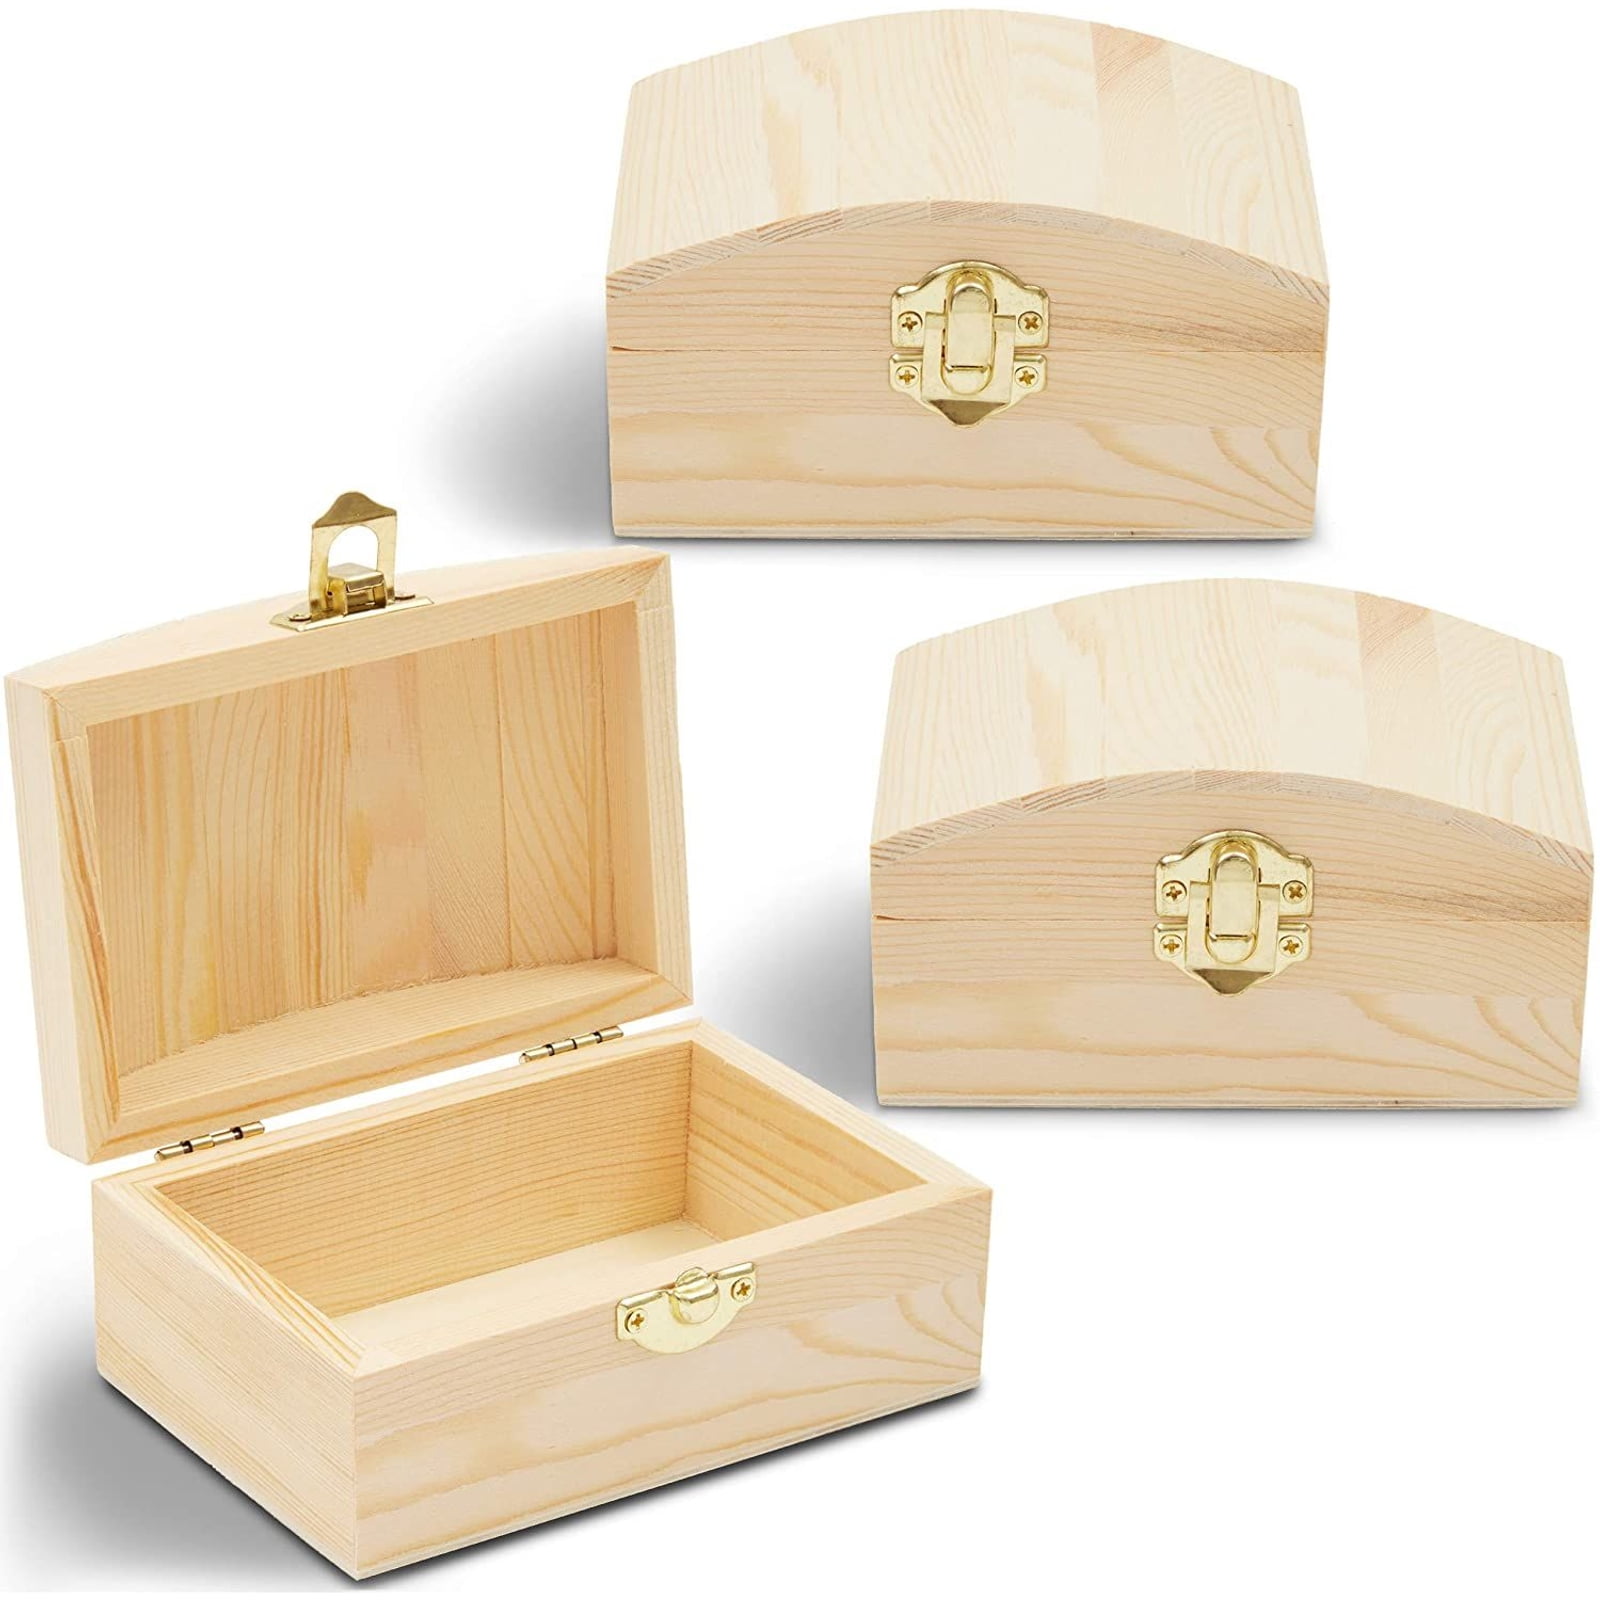 fishing tackle Plain wooden storage boxes compartments beads jewellery tea 